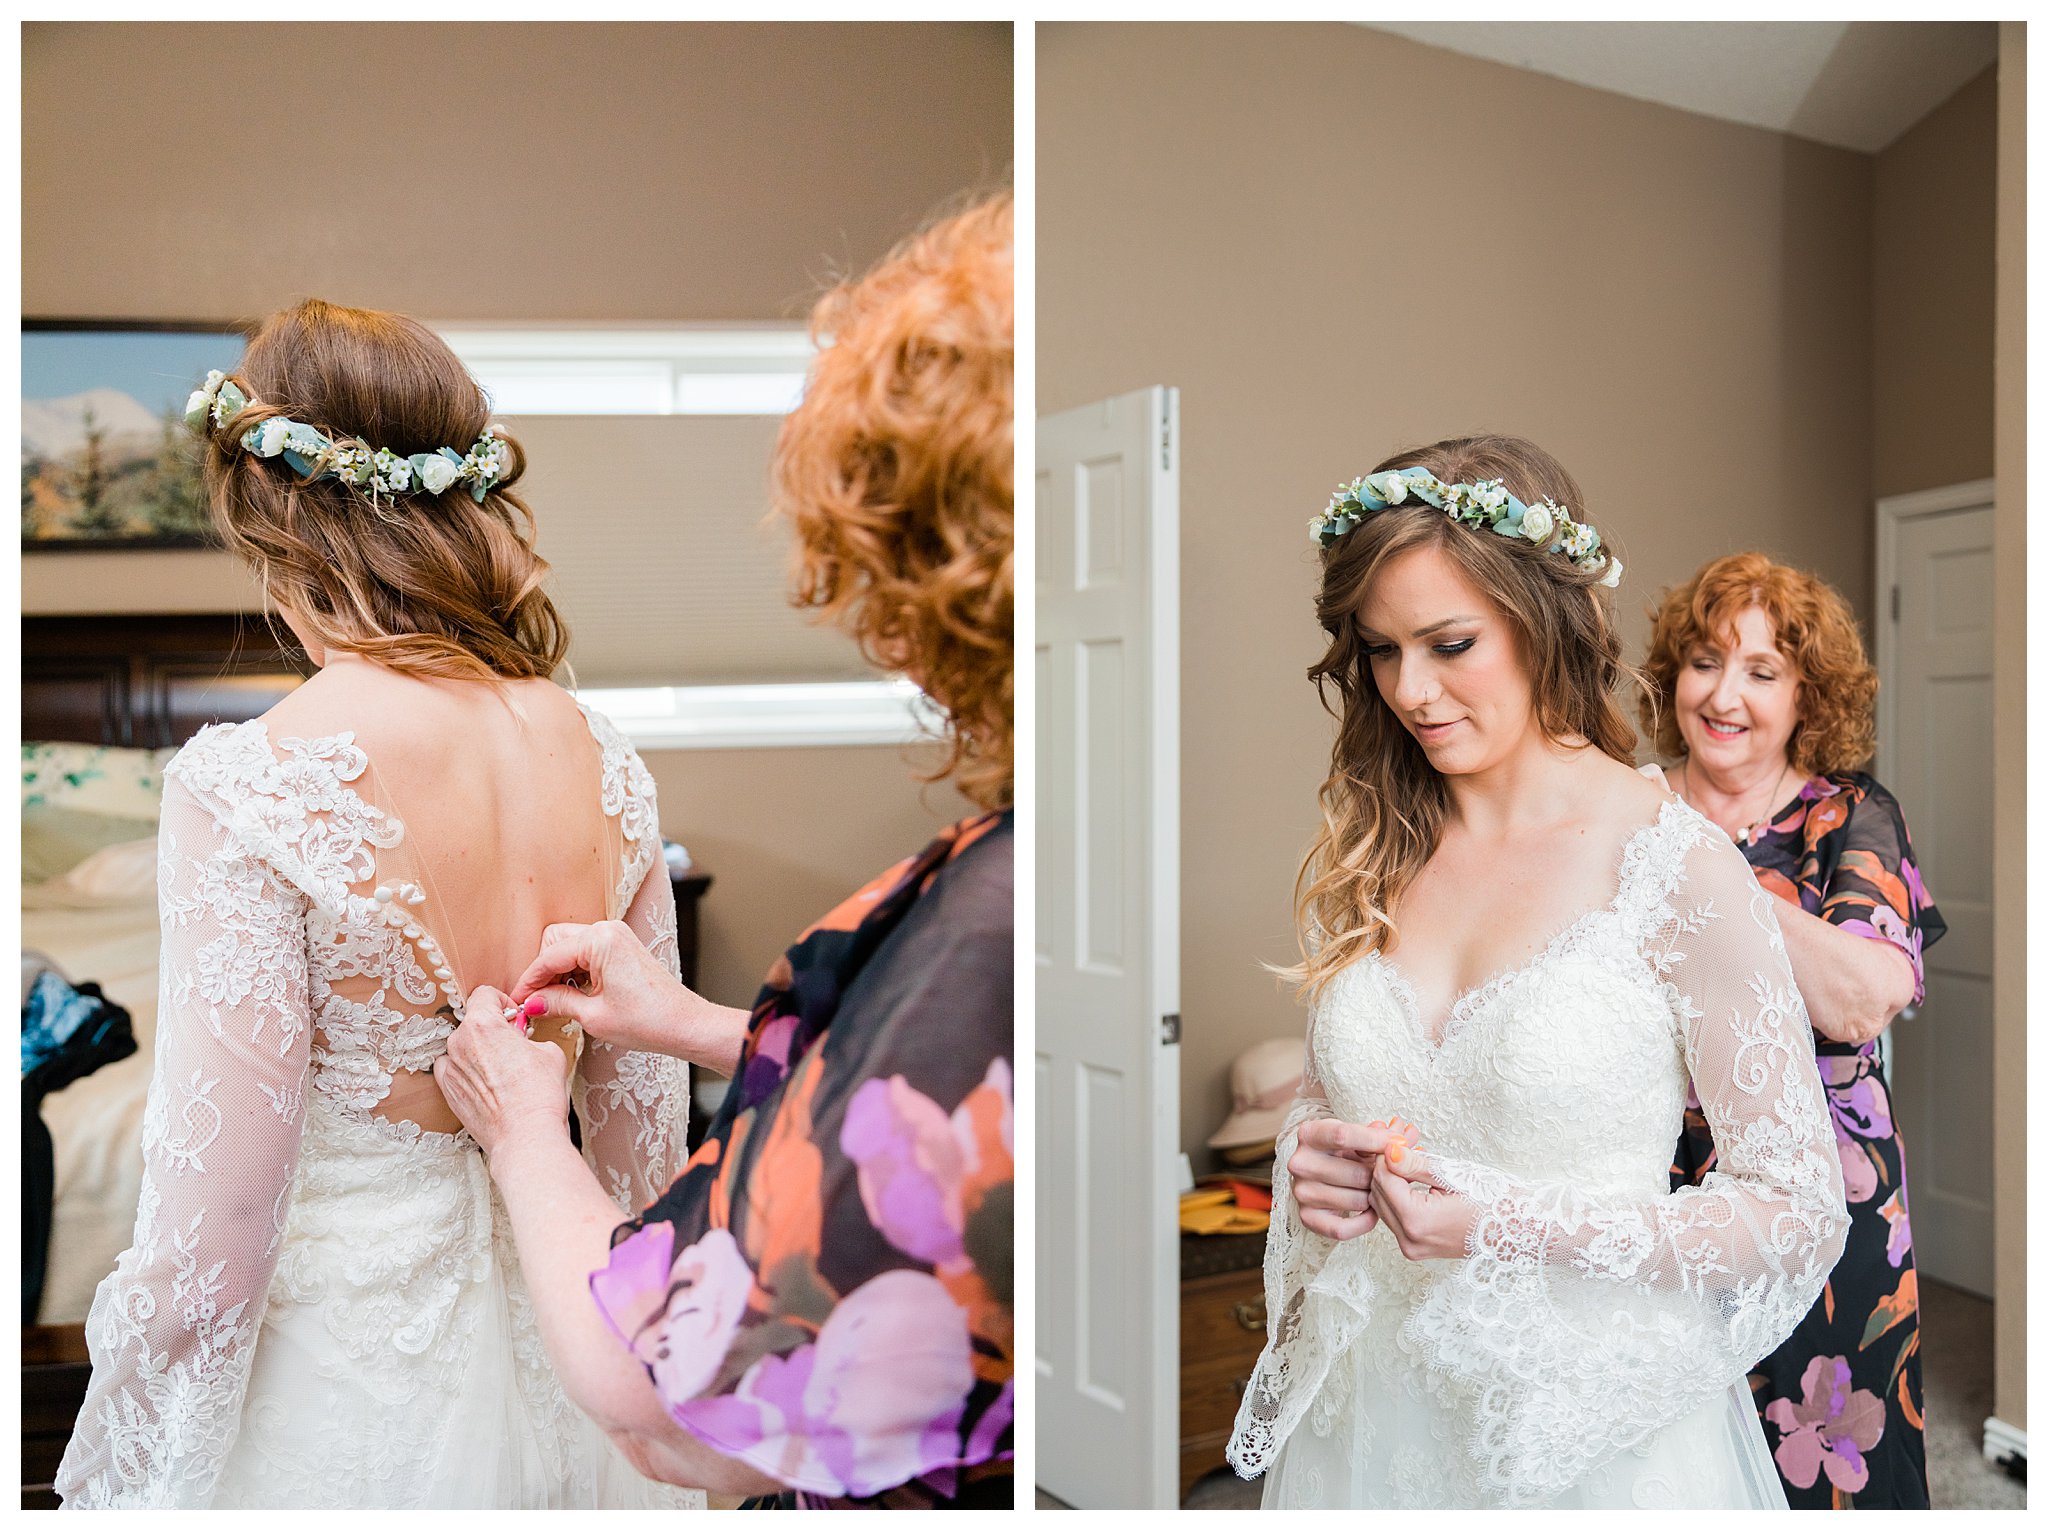 A bride gets ready and puts her dress on